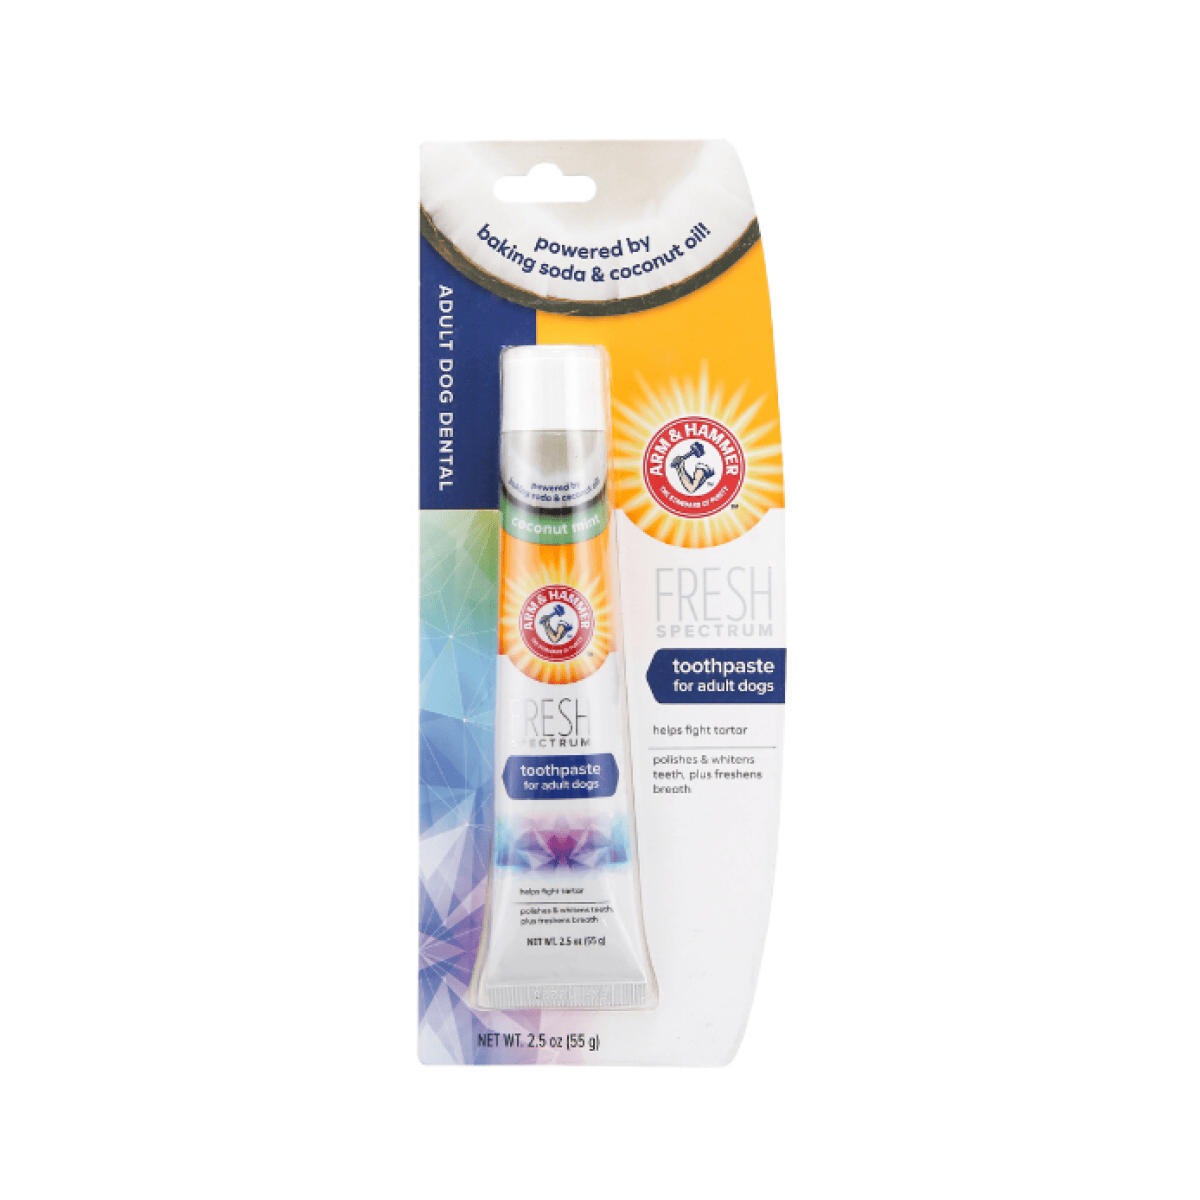 Arm & Hammer Fresh Coconut Mint Toothpaste 57g Main Image